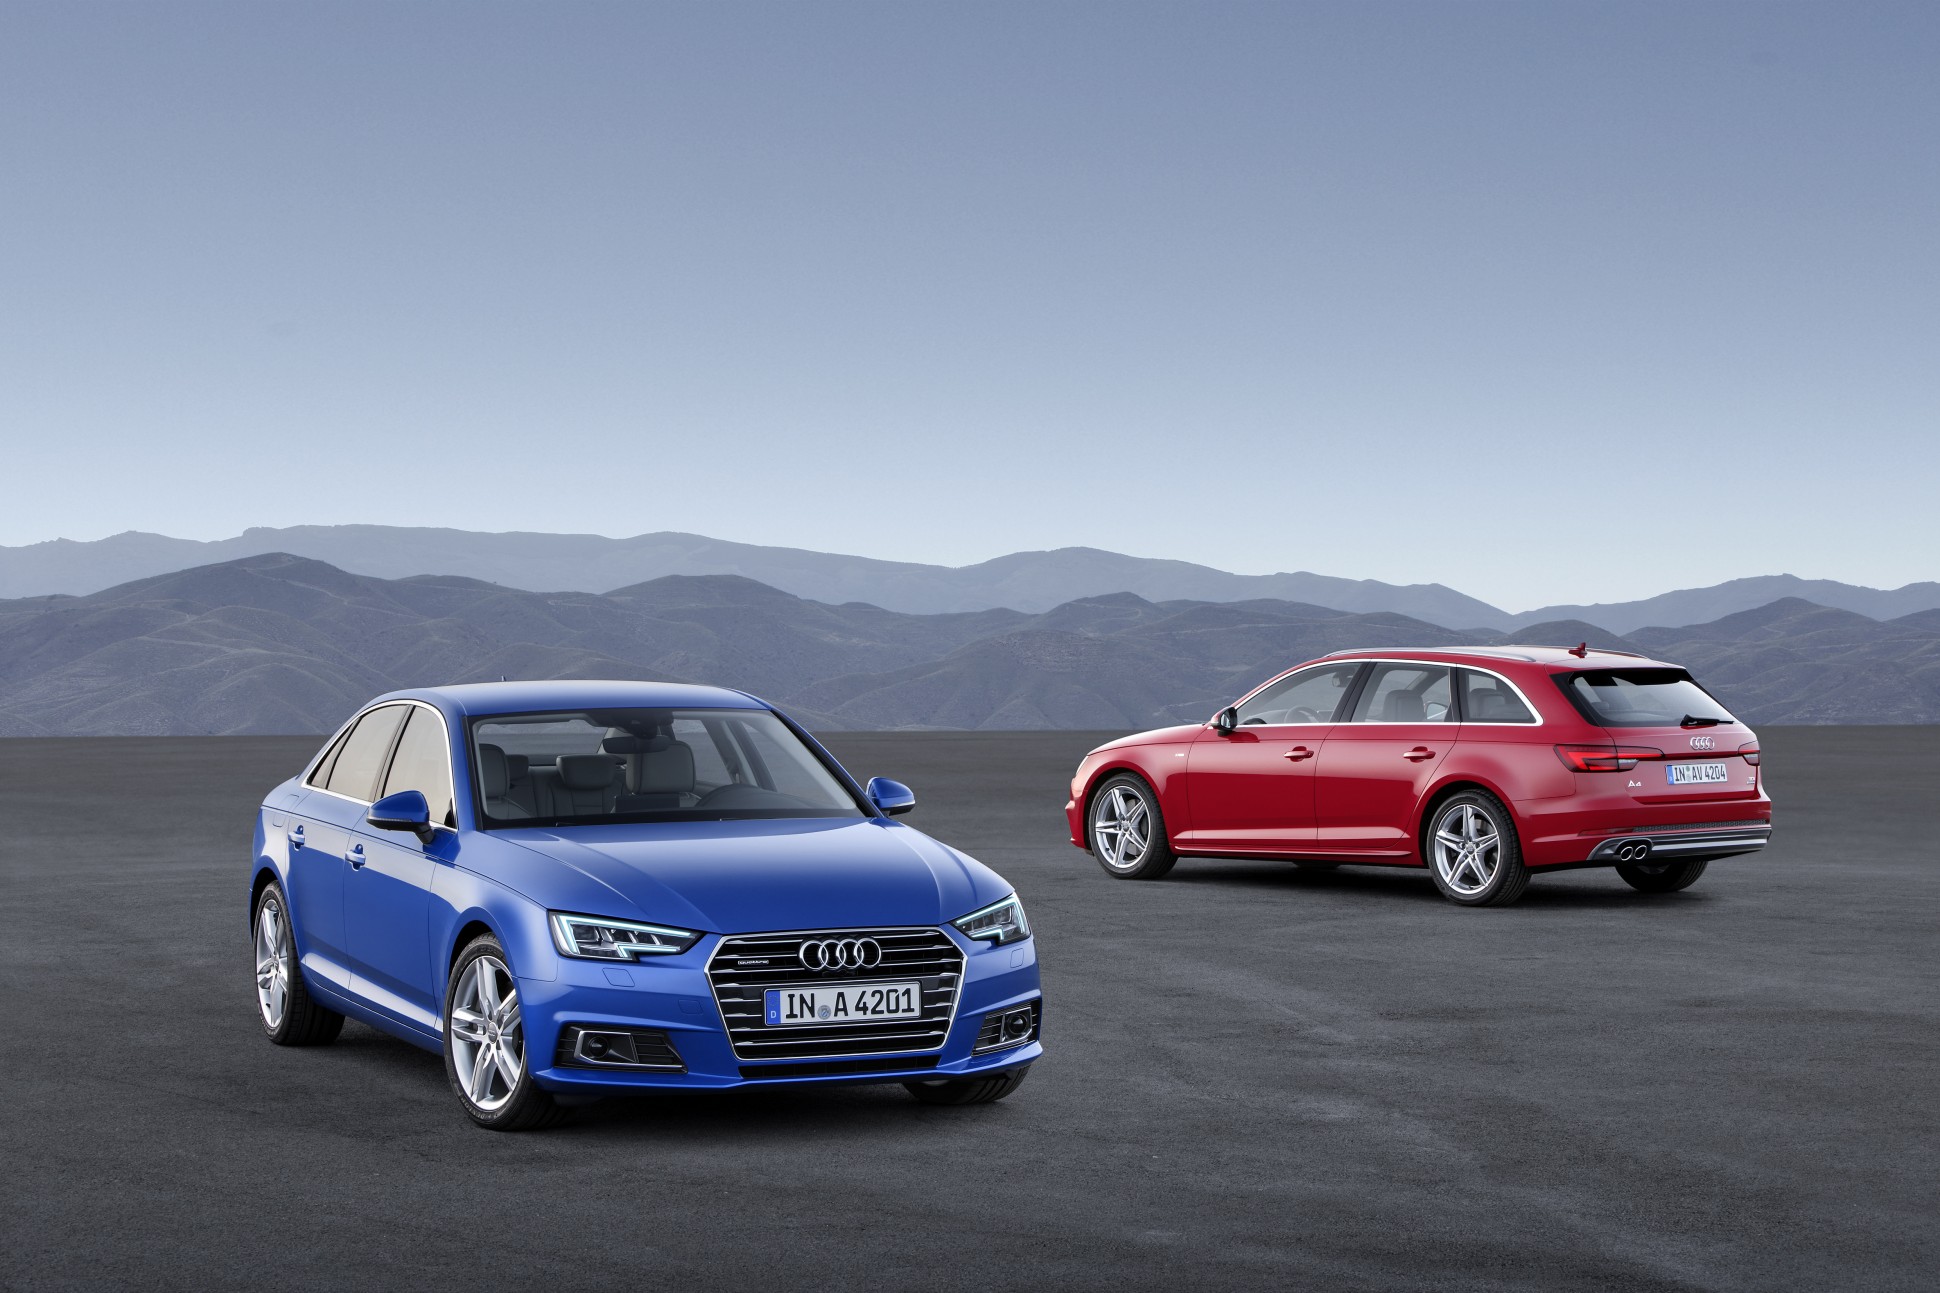 Audi, Led By The New A4 Sedan, Mounting U.S. Attack